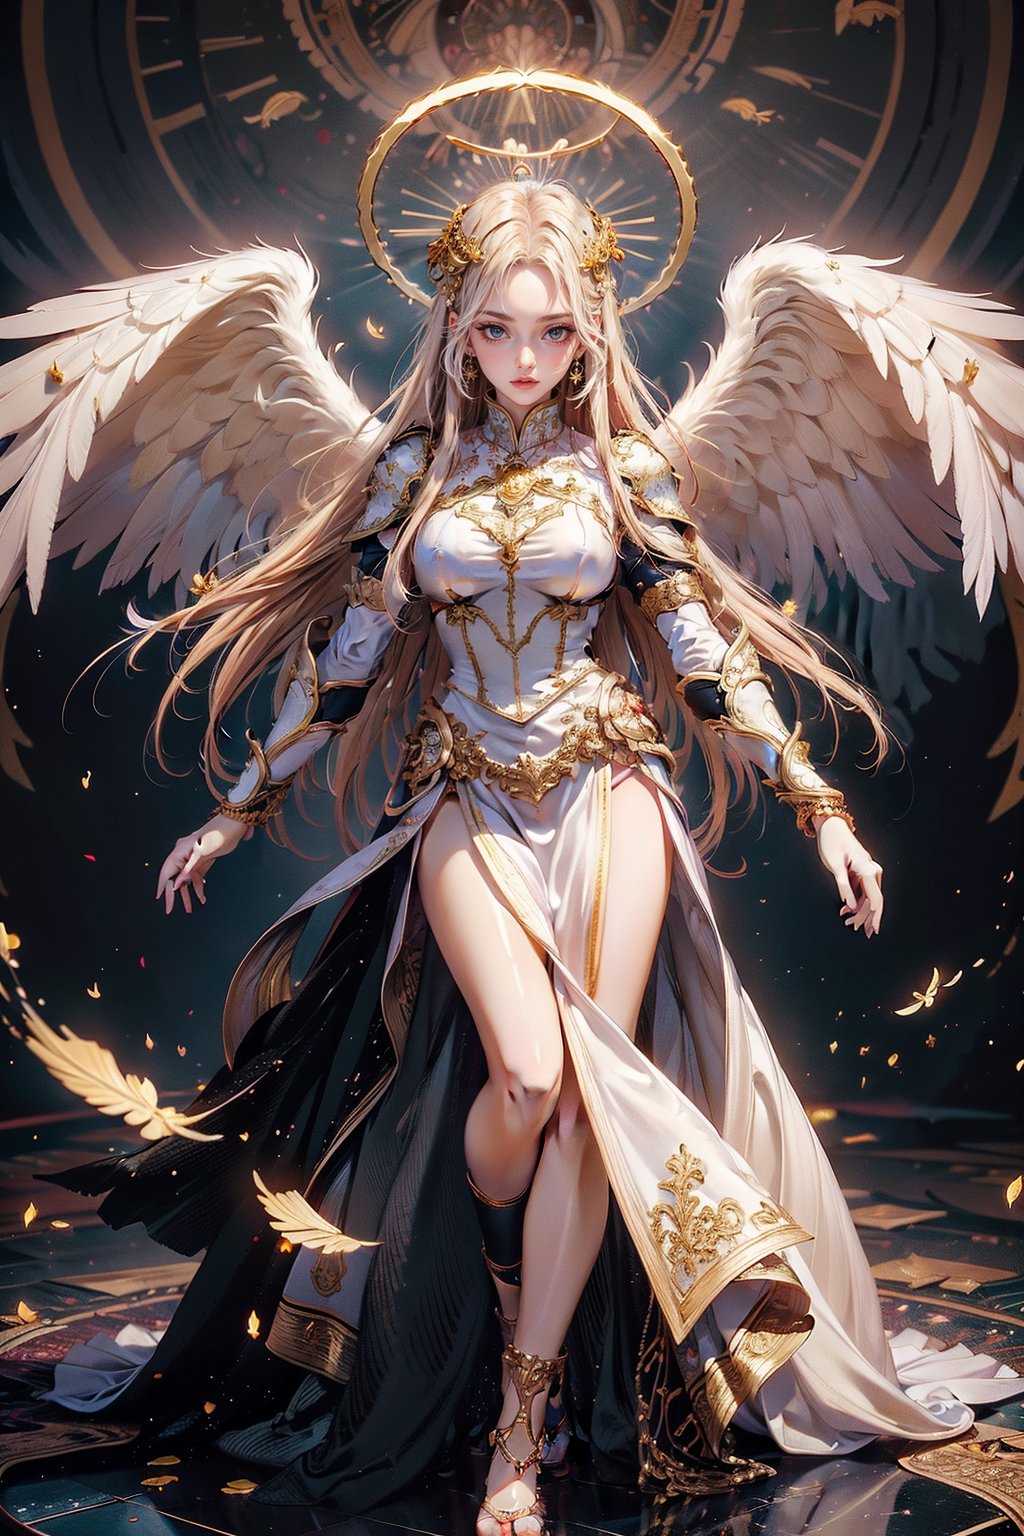 triumphant angel girl, roccoco irridescent fallen angel, cute young angel girl, long hair, white large wings, paradise, angel beaty, beatiful, 8k, oktavian render, high quality, masterpiece, dynamic pose, hot girl, praising, dark background, nimb, cinemathic scene, shiny,DonMM1y4XL,An angel , an angel wearing gold and silver crystal armor, heaven background, glowing halo around head, golden hair, white feathered wings,| centered| key visual | intricate| highly detailed| breathtaking beauty| precise lineart| vibrant| comprehensive cinematic, dynamic pose, best quality, 8k, golden hour,angel_wings